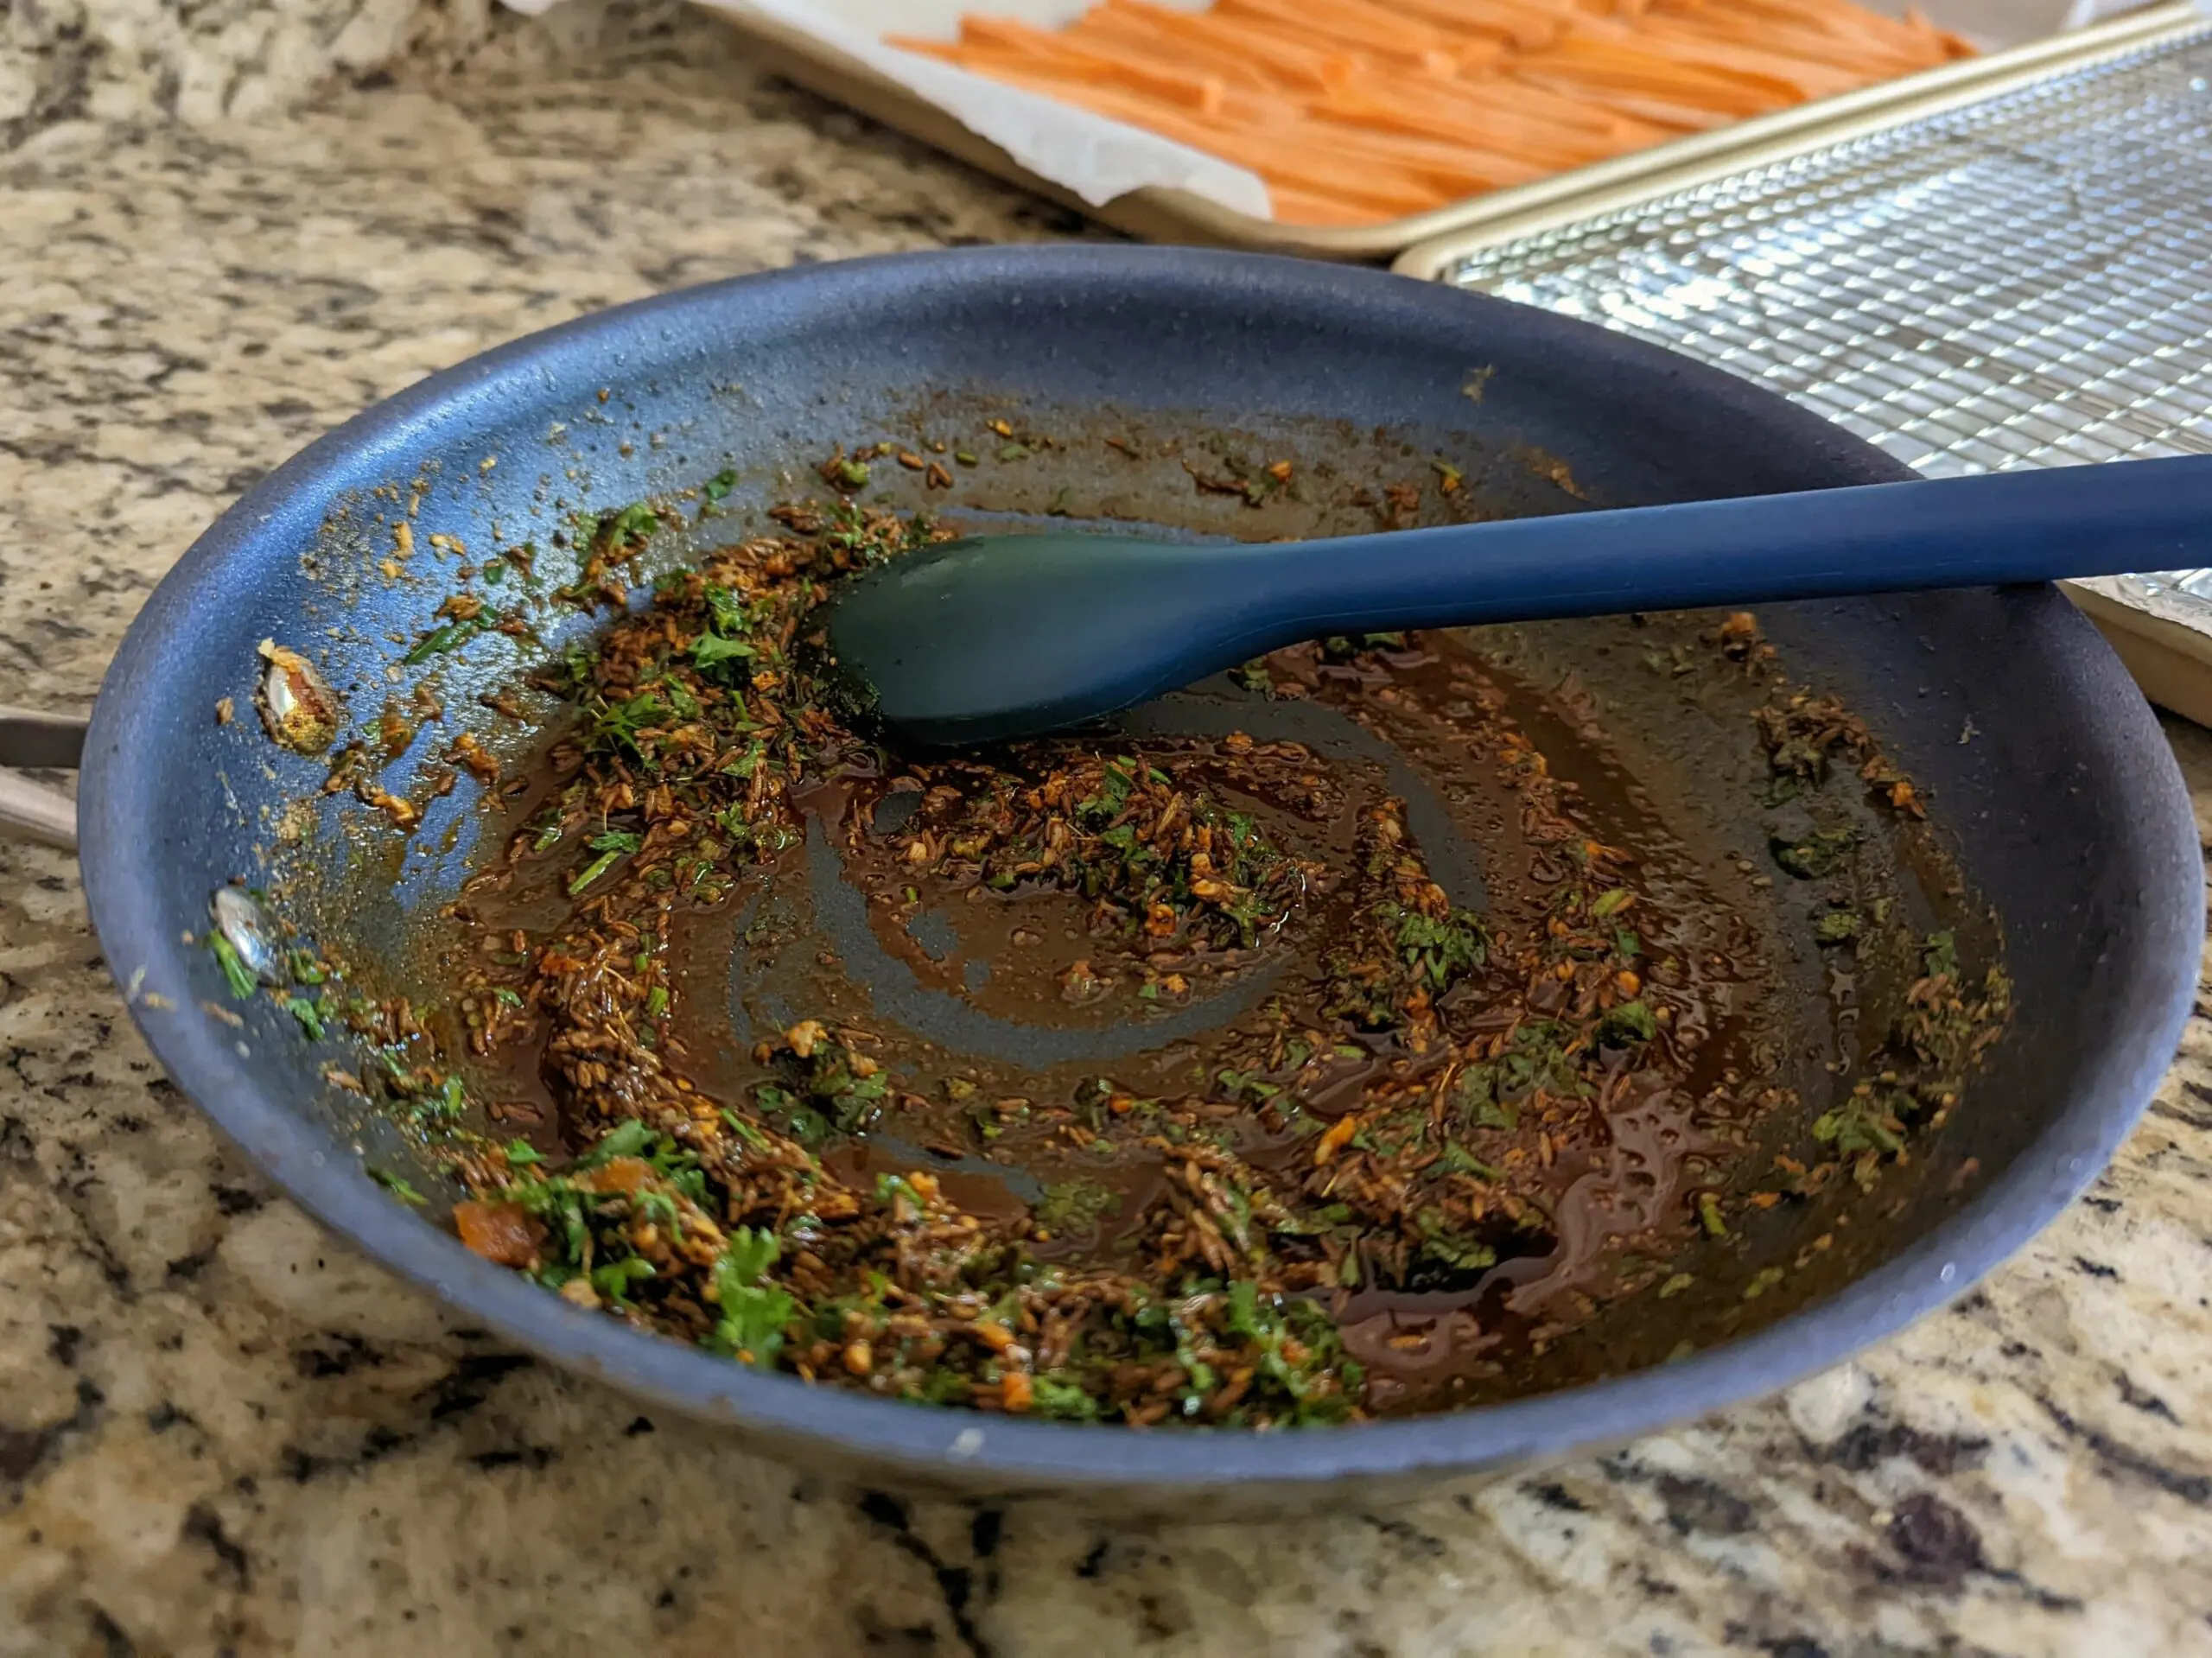 Stir the brown sugar and herbs into the skillet.